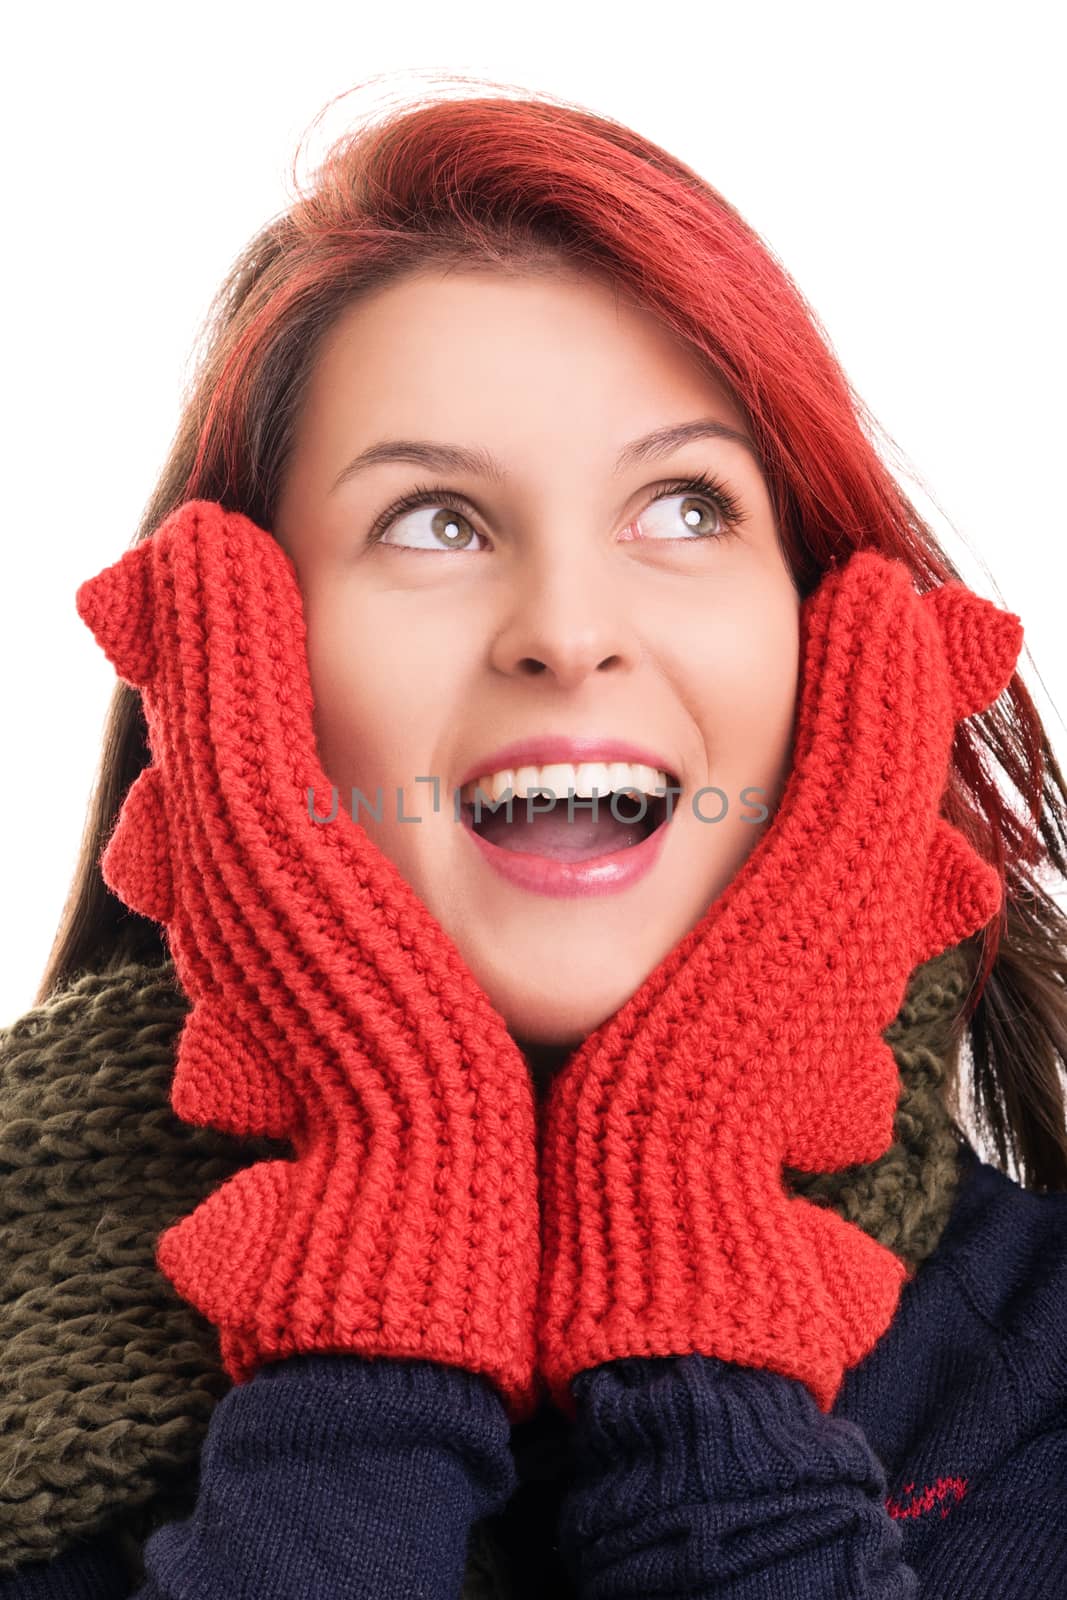 Surprised young girl in winter clothes by Mendelex